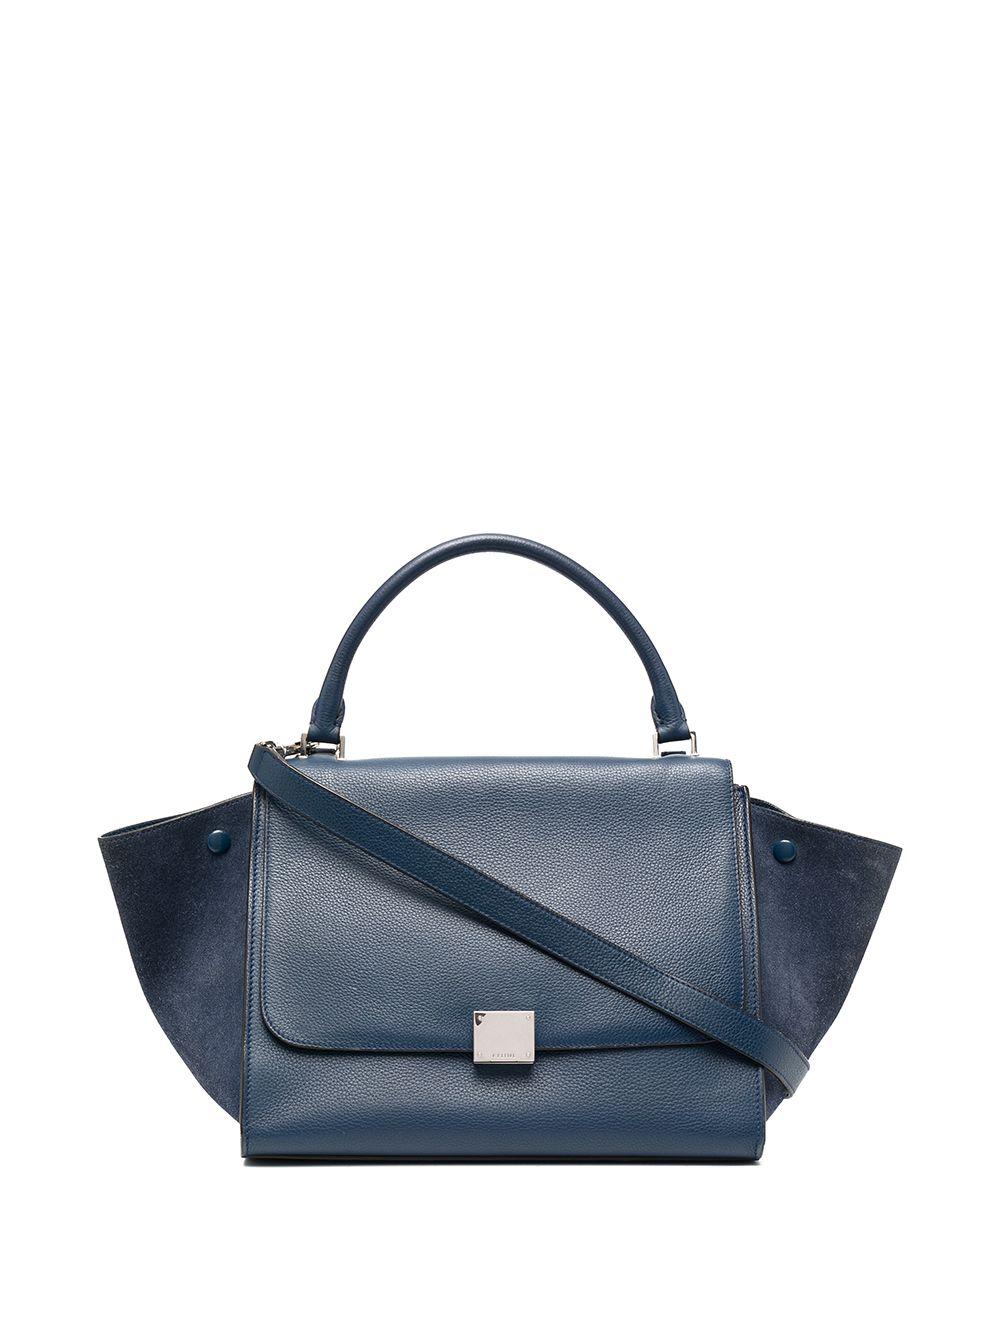 Celine blue leather & suede Trapeze Medium size tote bag featuring a single rounded top handle, a foldover top,  an adjustable detachable shoulder strap, an internal patch pocket, a rear zip-fastening pocket and silver-tone hardware.
In excellent